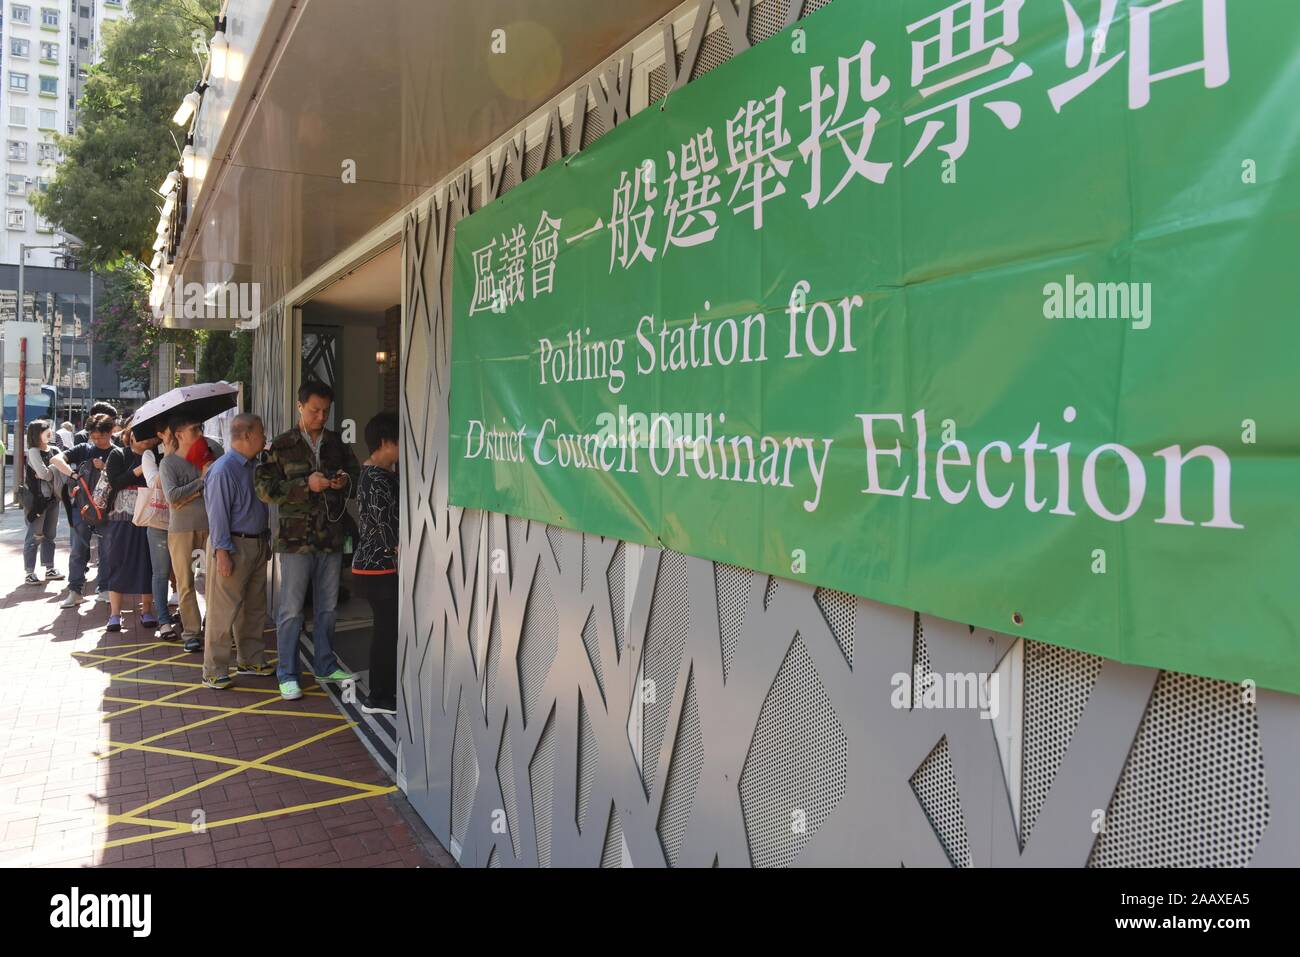 People line up at a polling station to vote in the Mong Kok District Council elections. Hong Kong held its district council election under a rare atmosphere of calm and peace after weeks of intense clashes at numerous universities between anti-government protesters and police which continue into its sixth month of demonstrations. Stock Photo